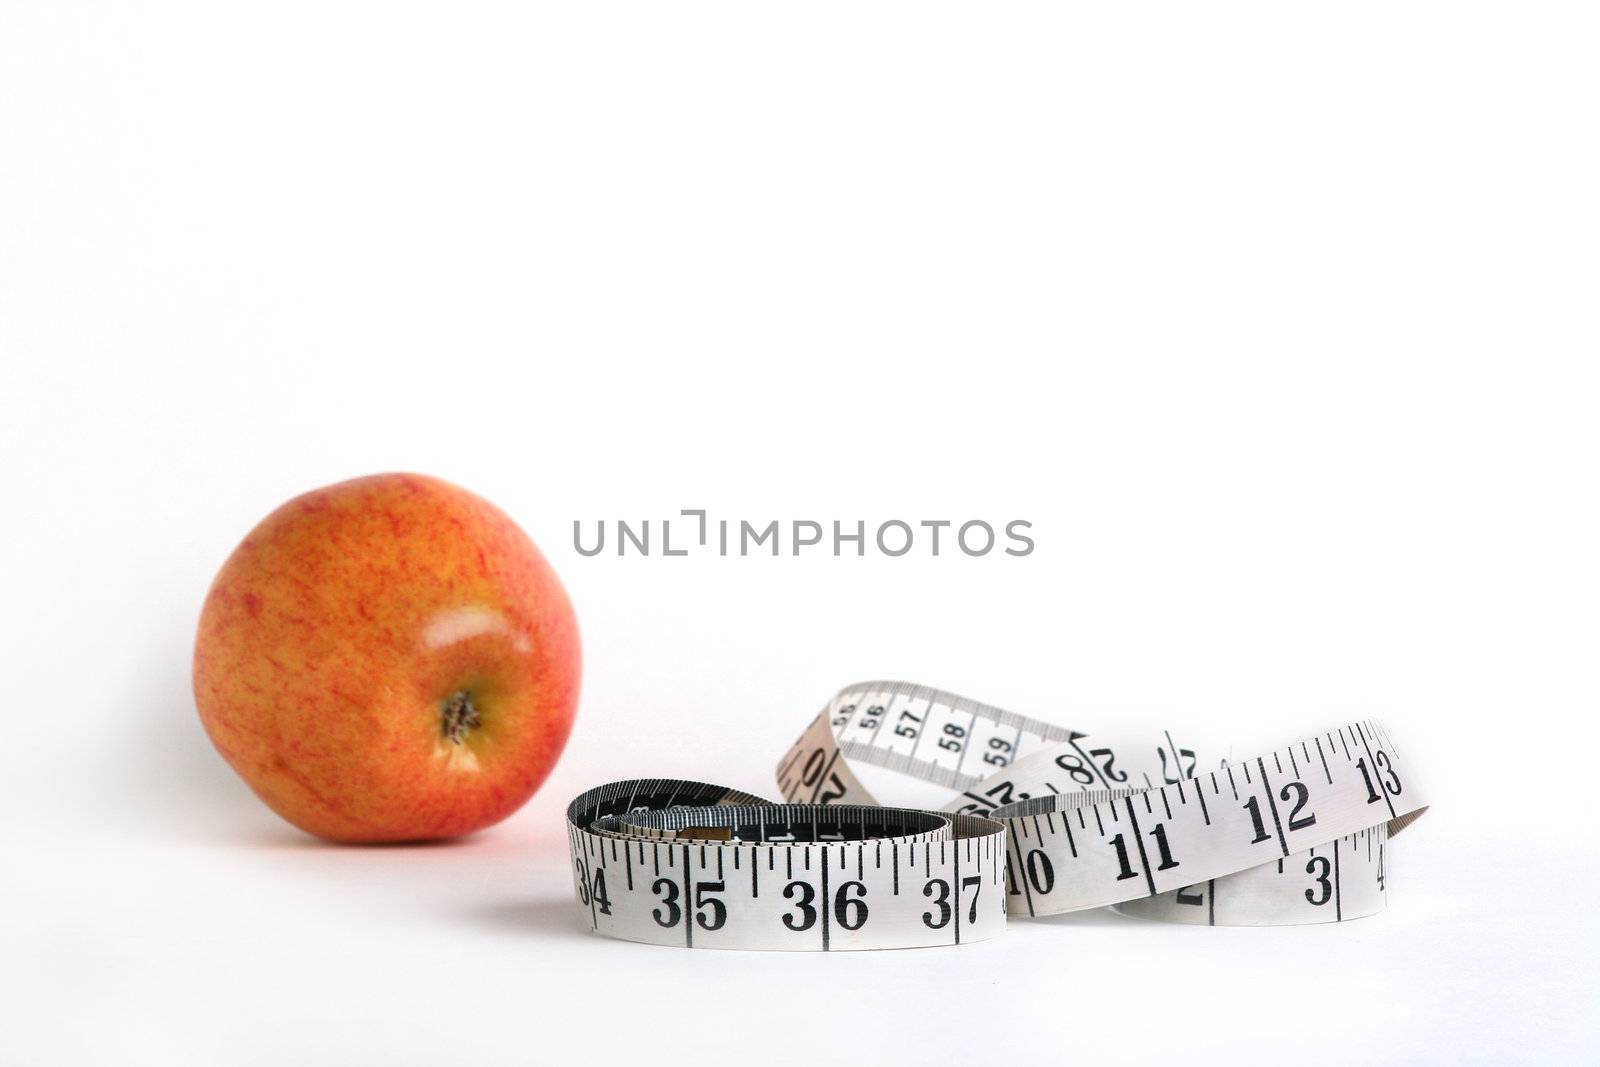 Tape measure and an apple characterise diet possibility.